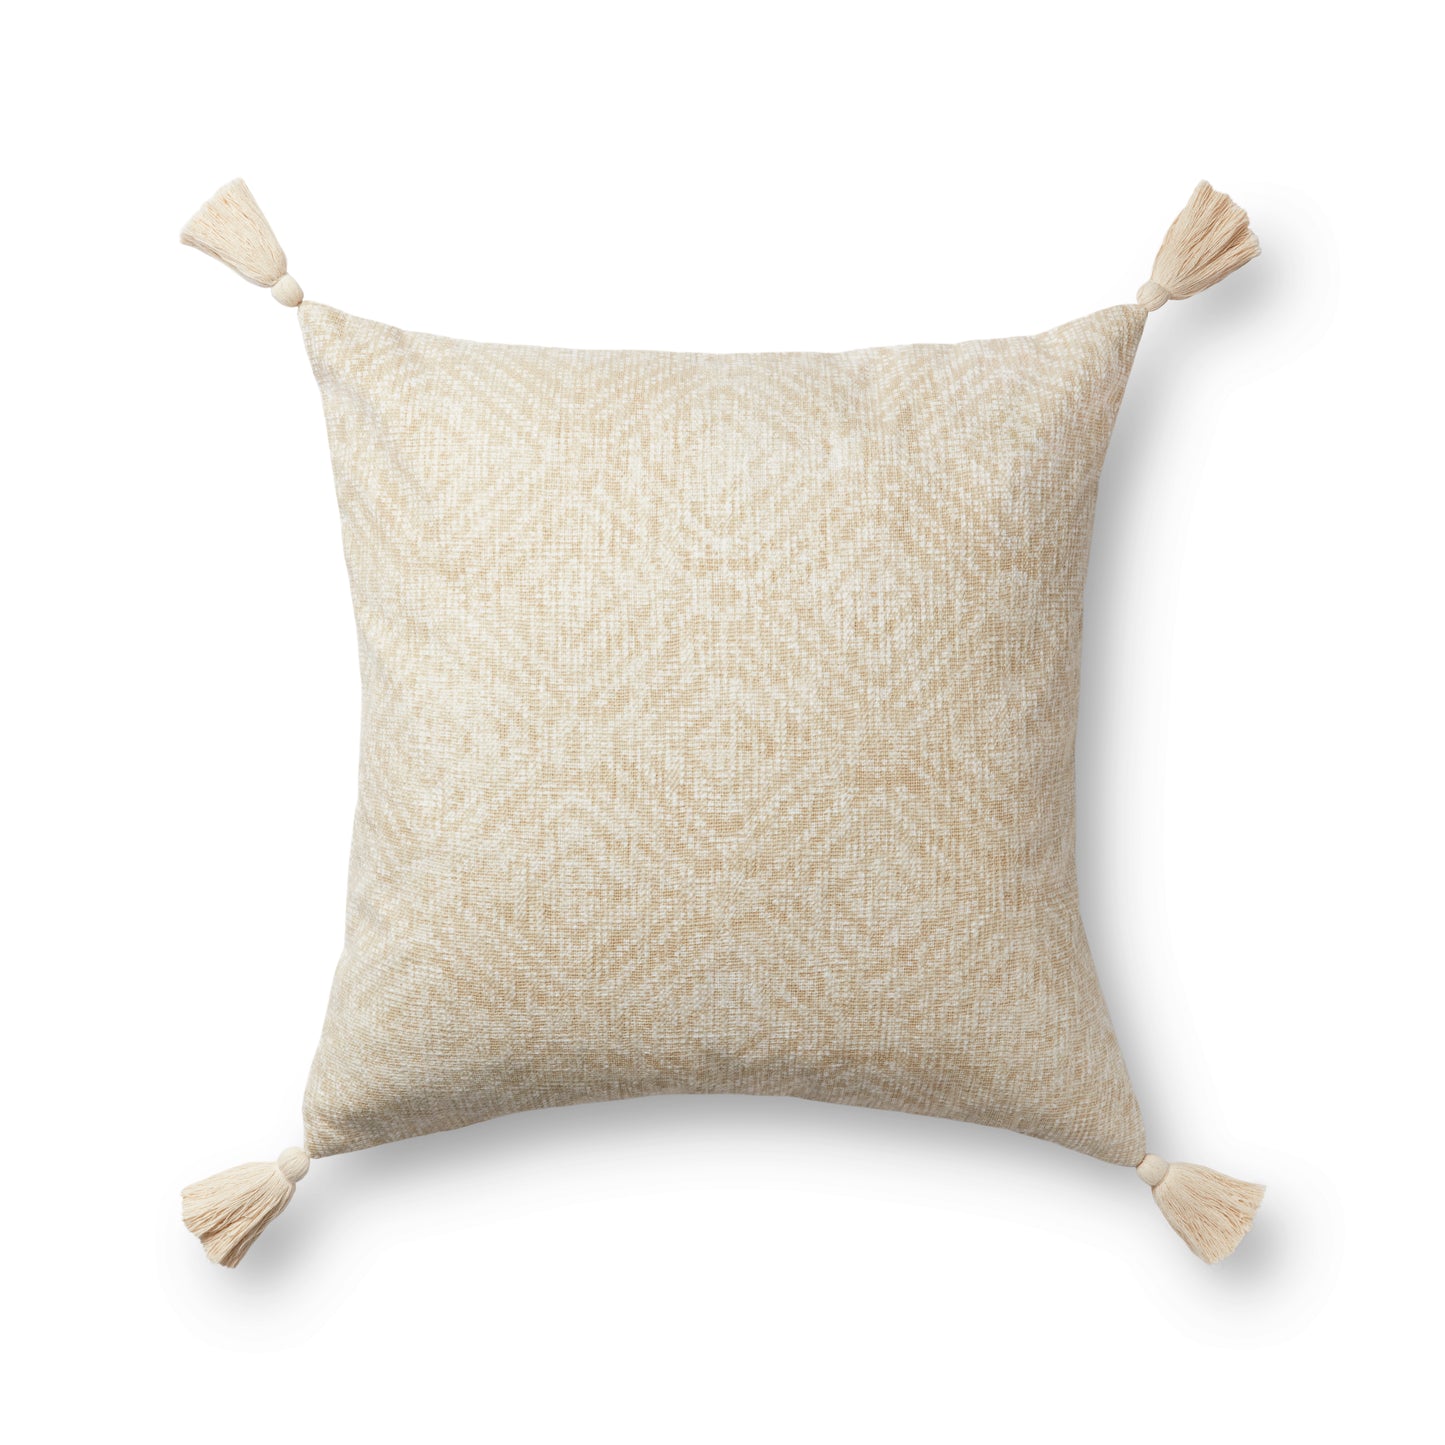 PILLOWS P0621 Cotton Indoor Pillow from Loloi